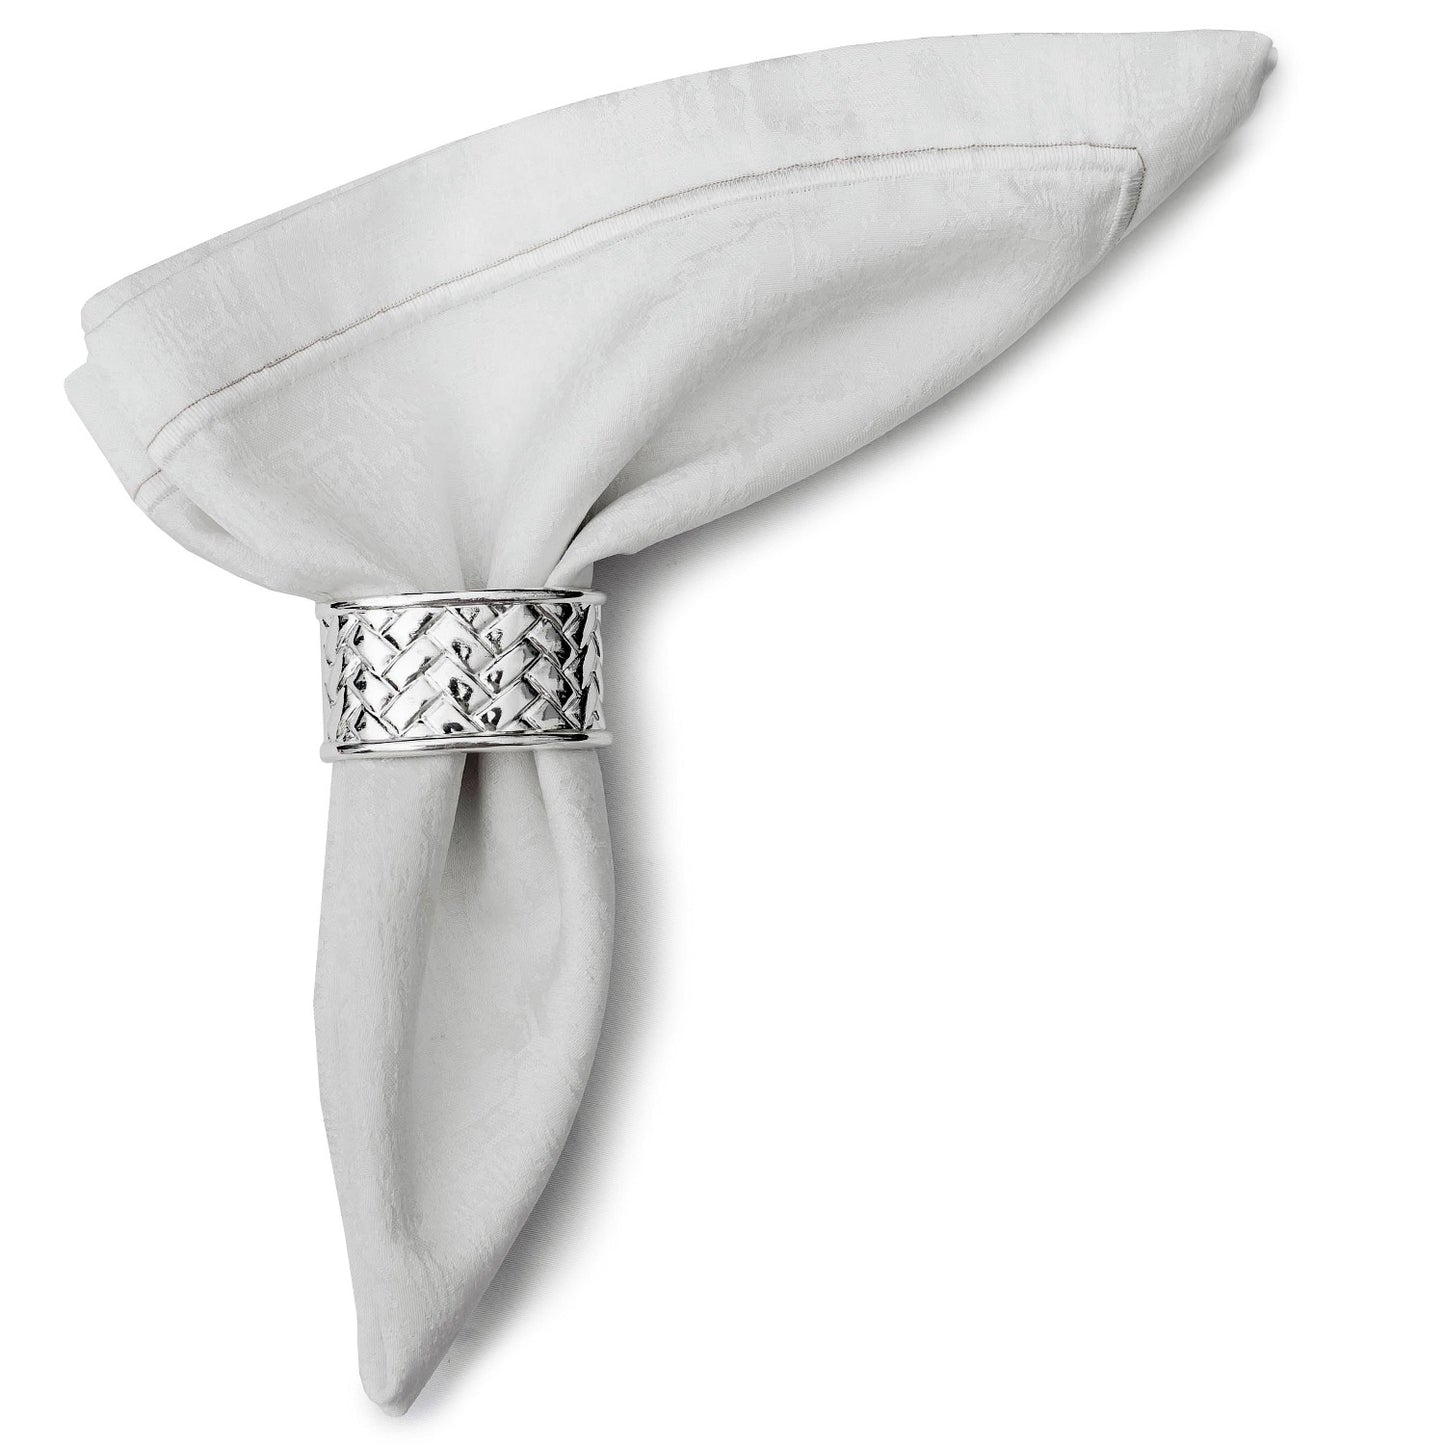 SALE Oval Braided Silver Plated Napkin Rings Set of 4 Napkin Rings Nicole Fantini Collection   